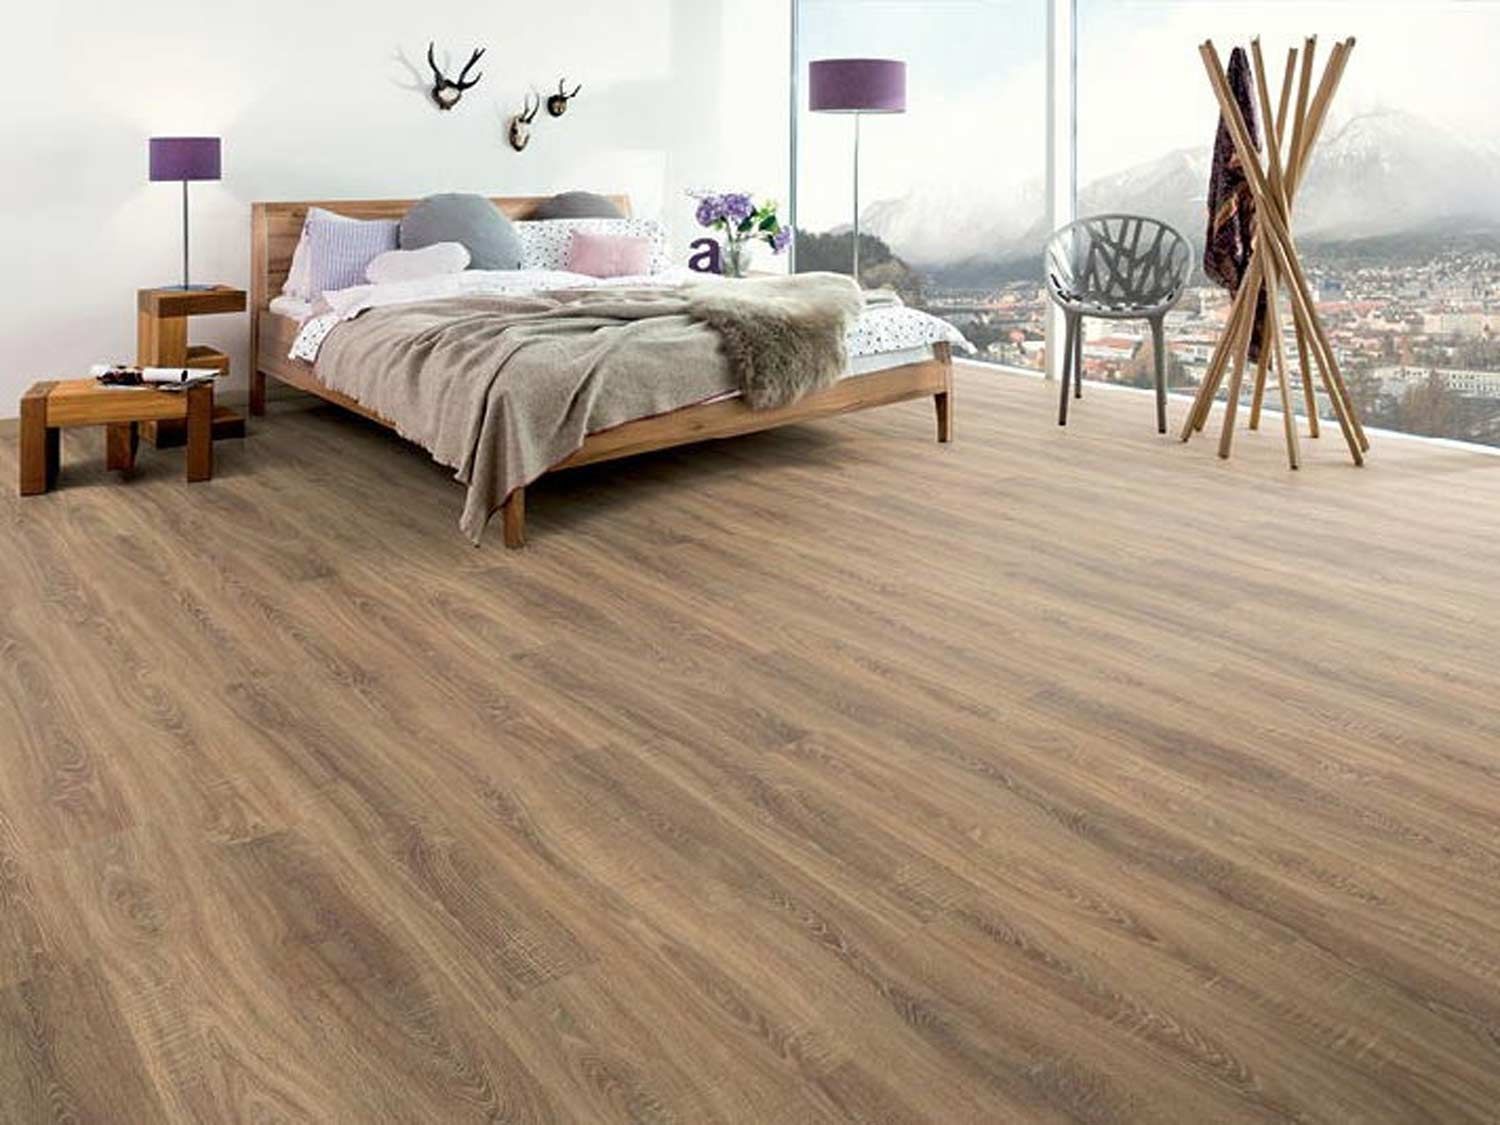 Elf Nature Oak Laminated Flooring 8mm, How Many Boxes Of Laminate Flooring Do I Need For A 12×12 Room